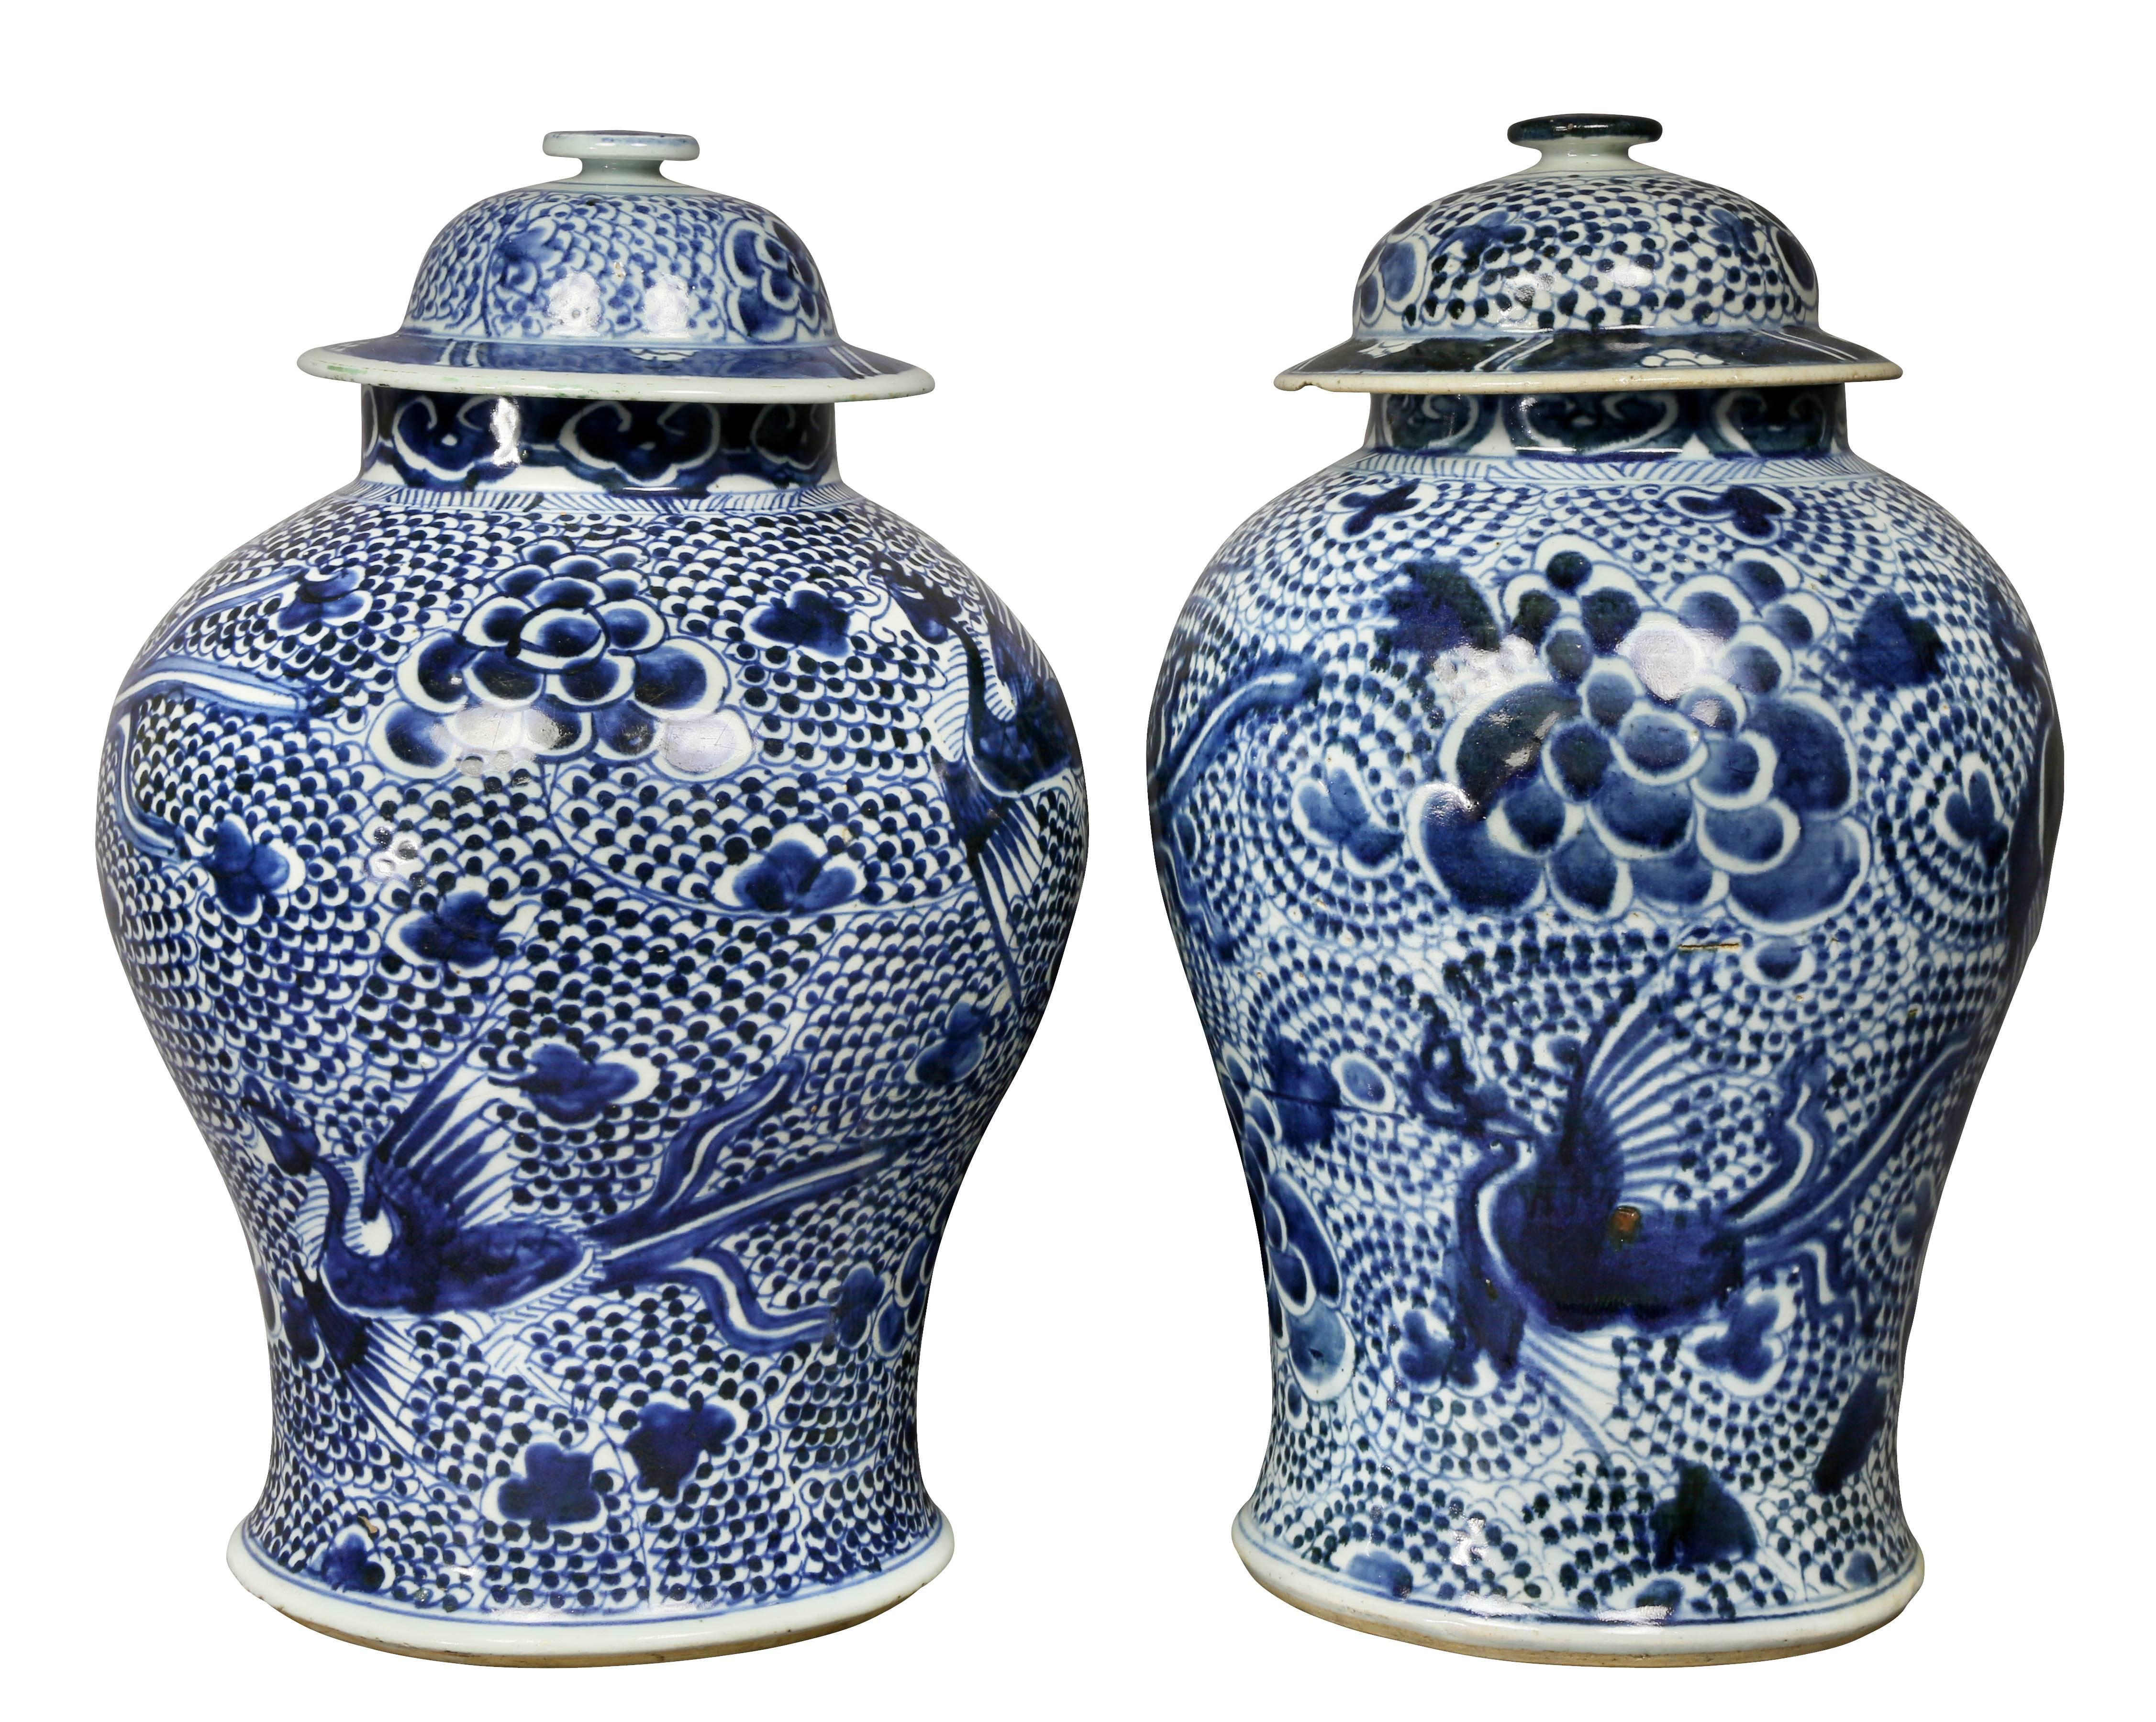 Matched Pair of Chinese Blue and White Covered Jars 2